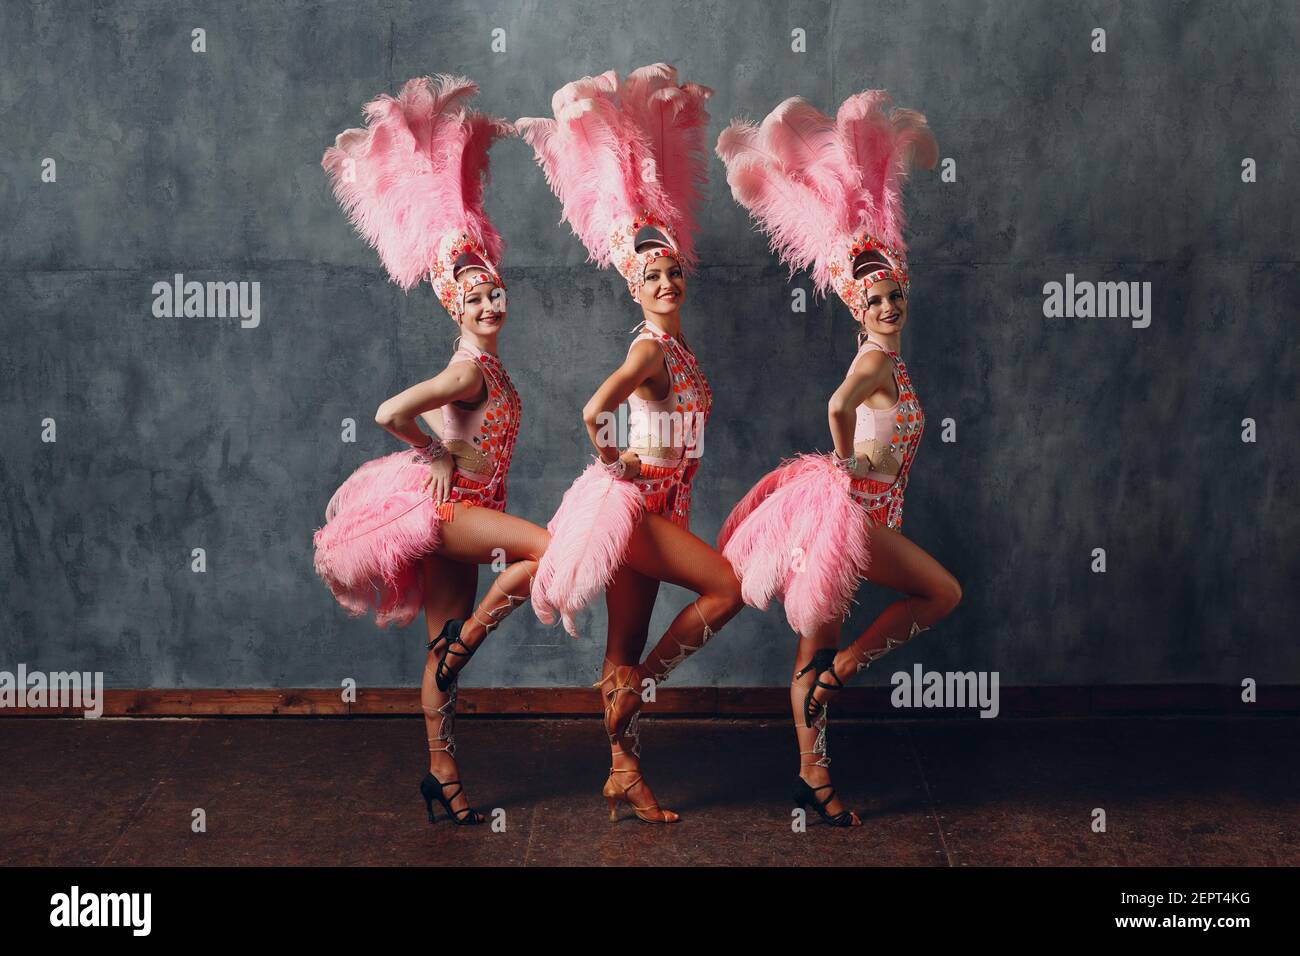 Women in cabaret costume with pink feathers plumage dancing samba Stock  Photo - Alamy